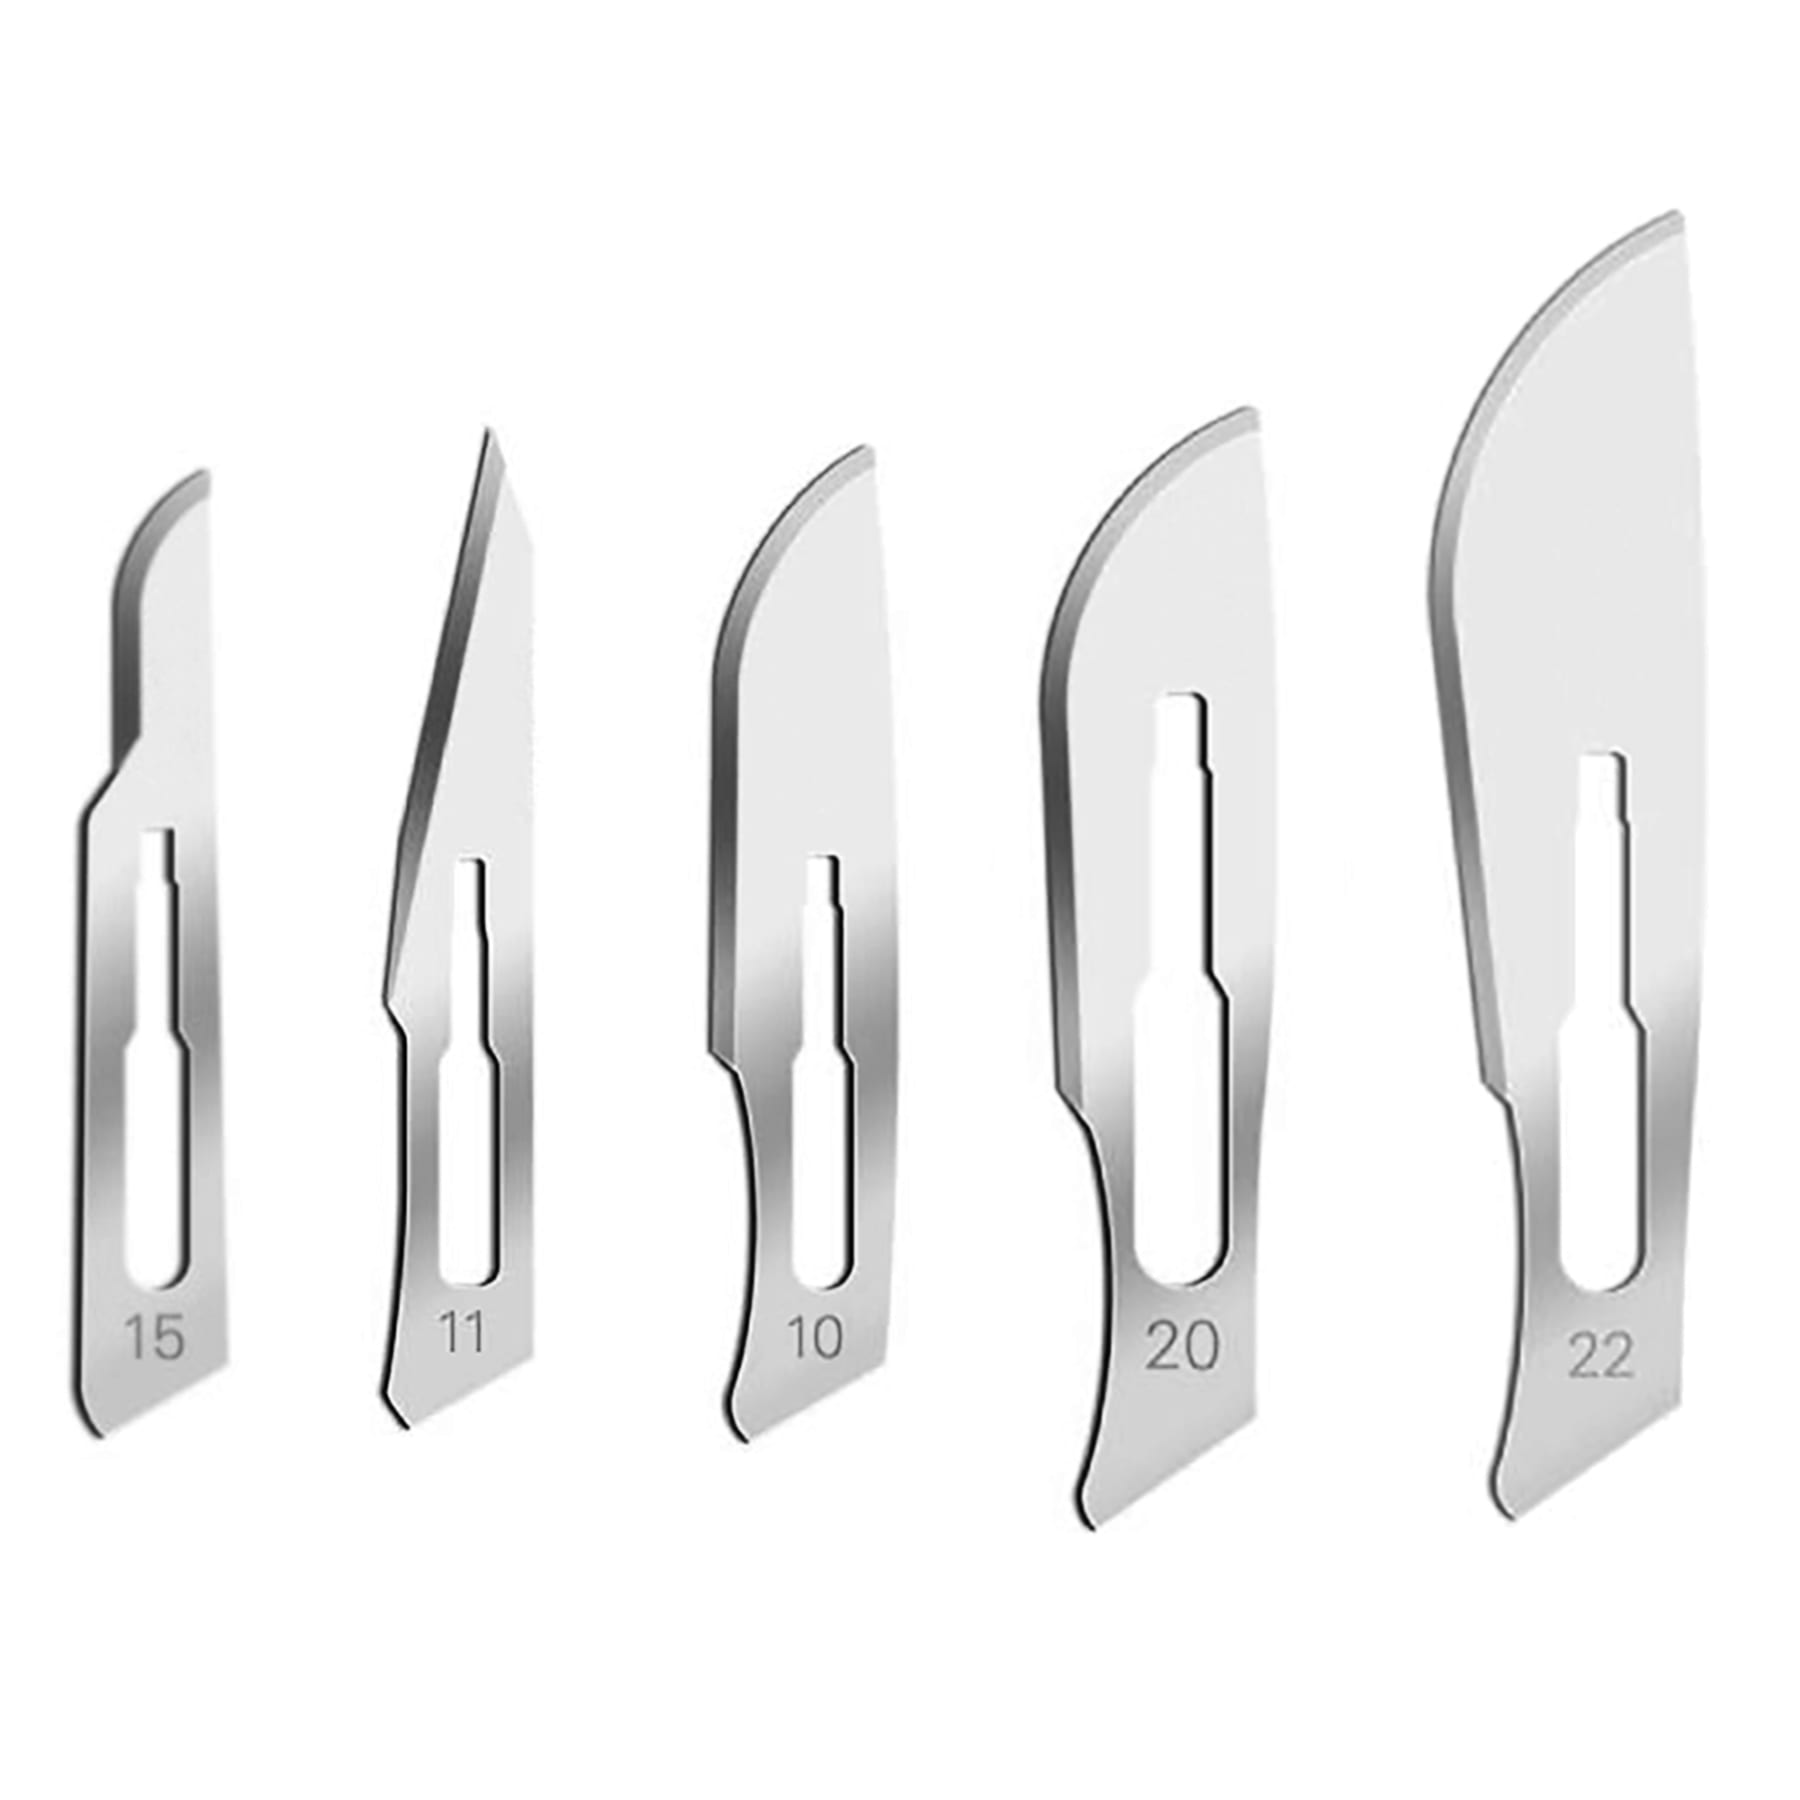 Propper Sterile Stainless Steel Surgical Blades